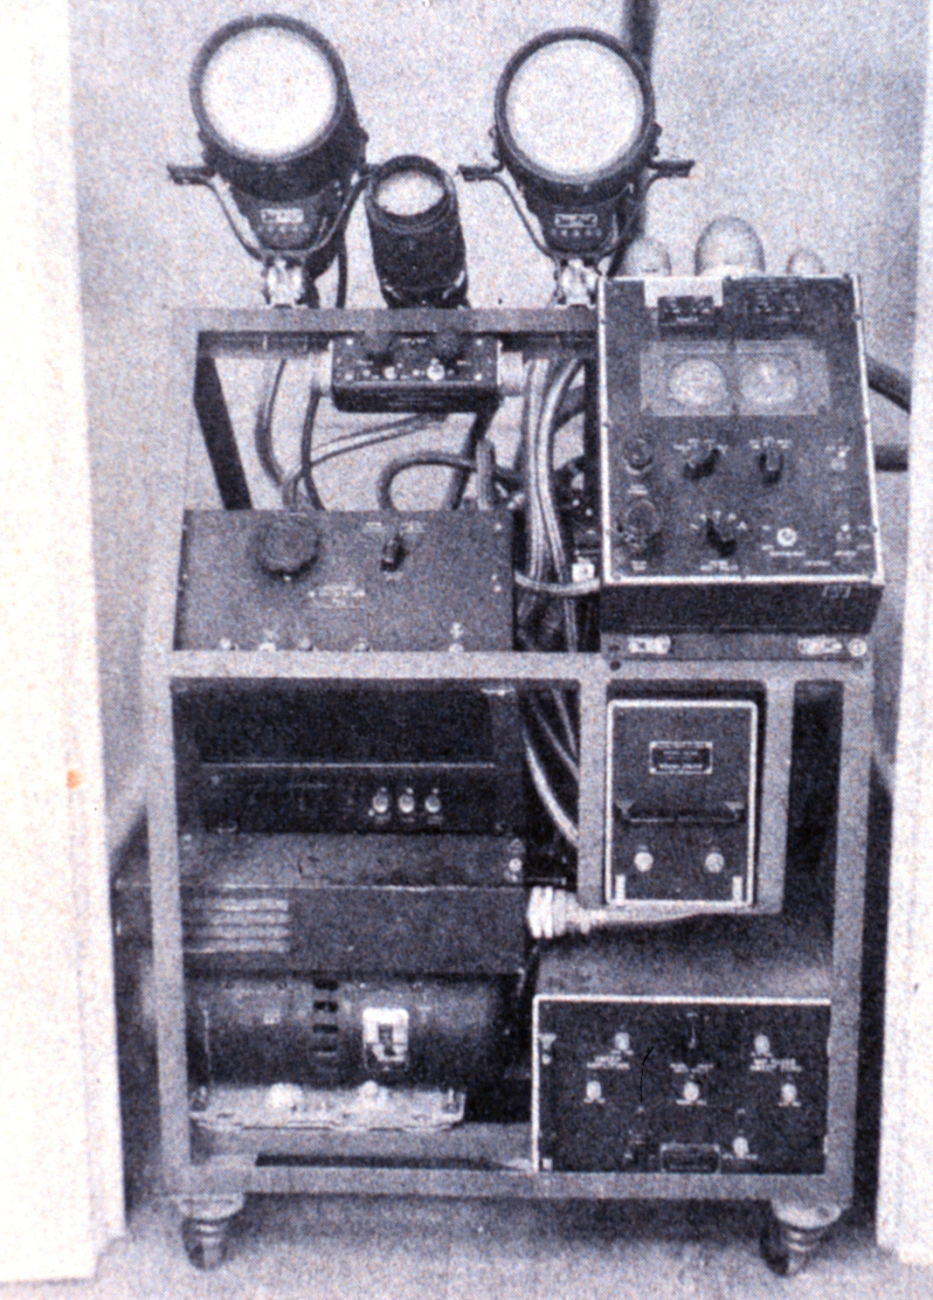 Control and indicators of SCR-717B radar unit as installed at a weather station